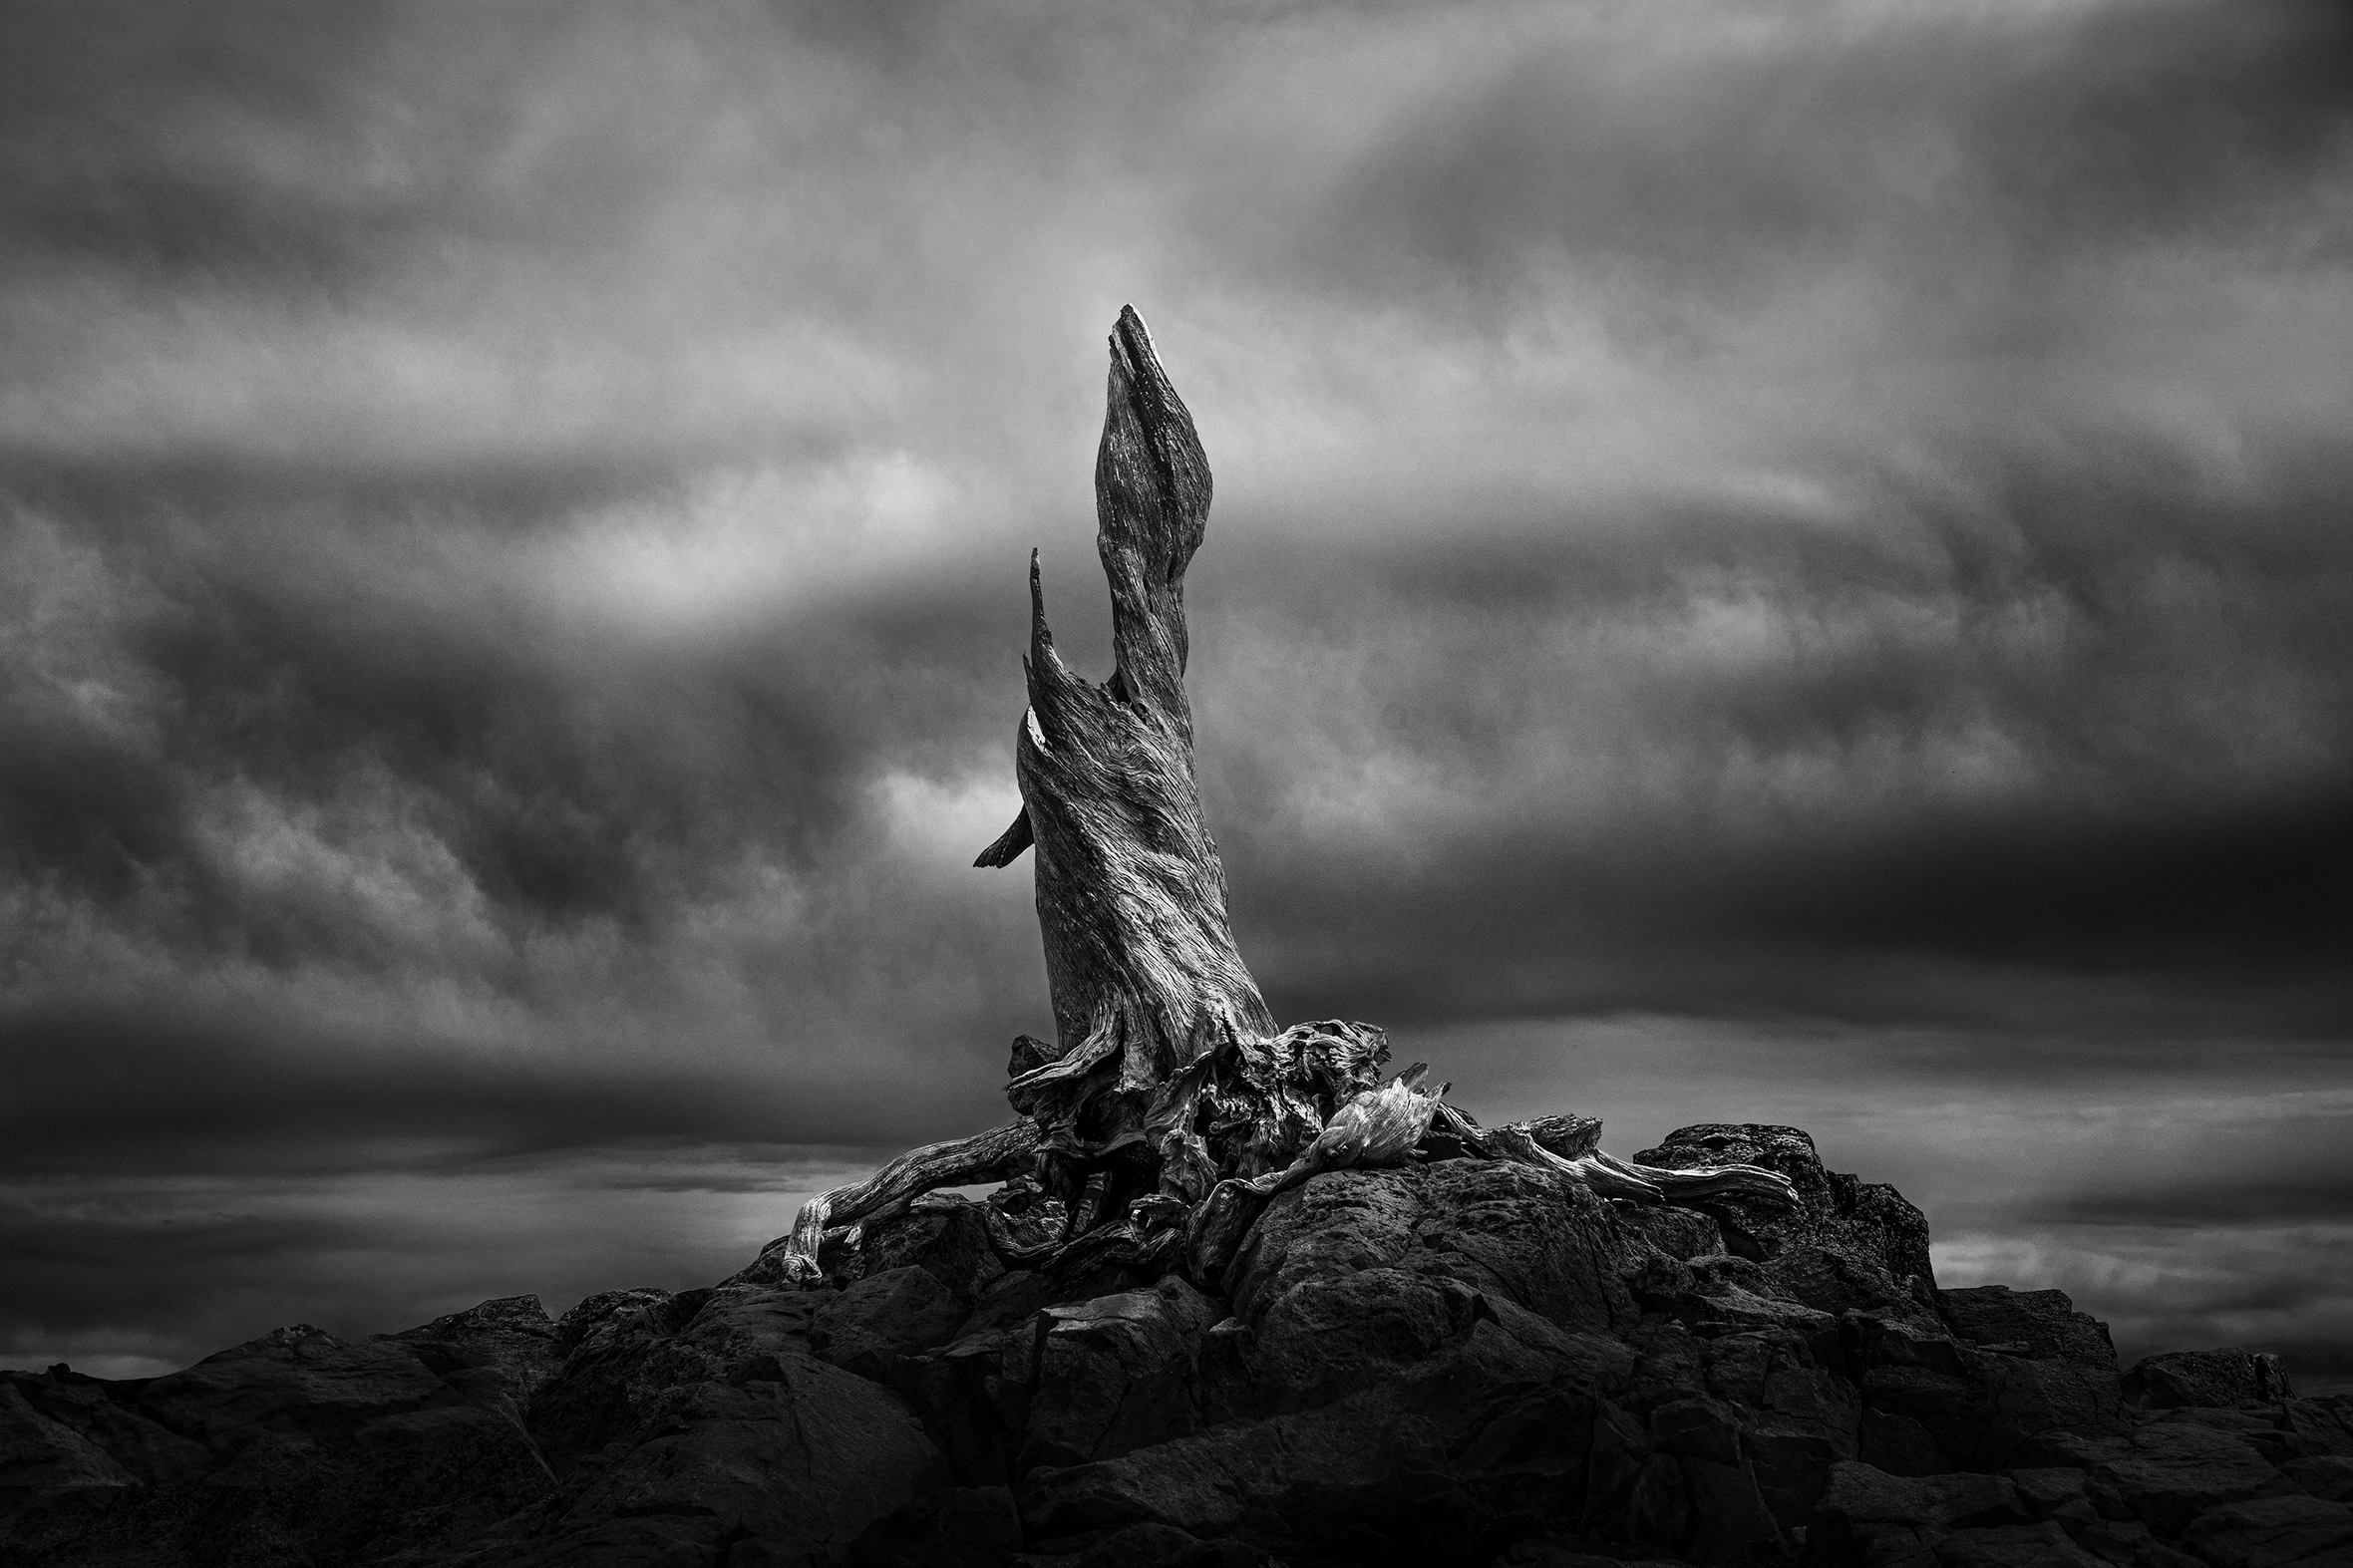 A petrified tree stump that looks like a sculpture in a desolate location against a cloudy background.